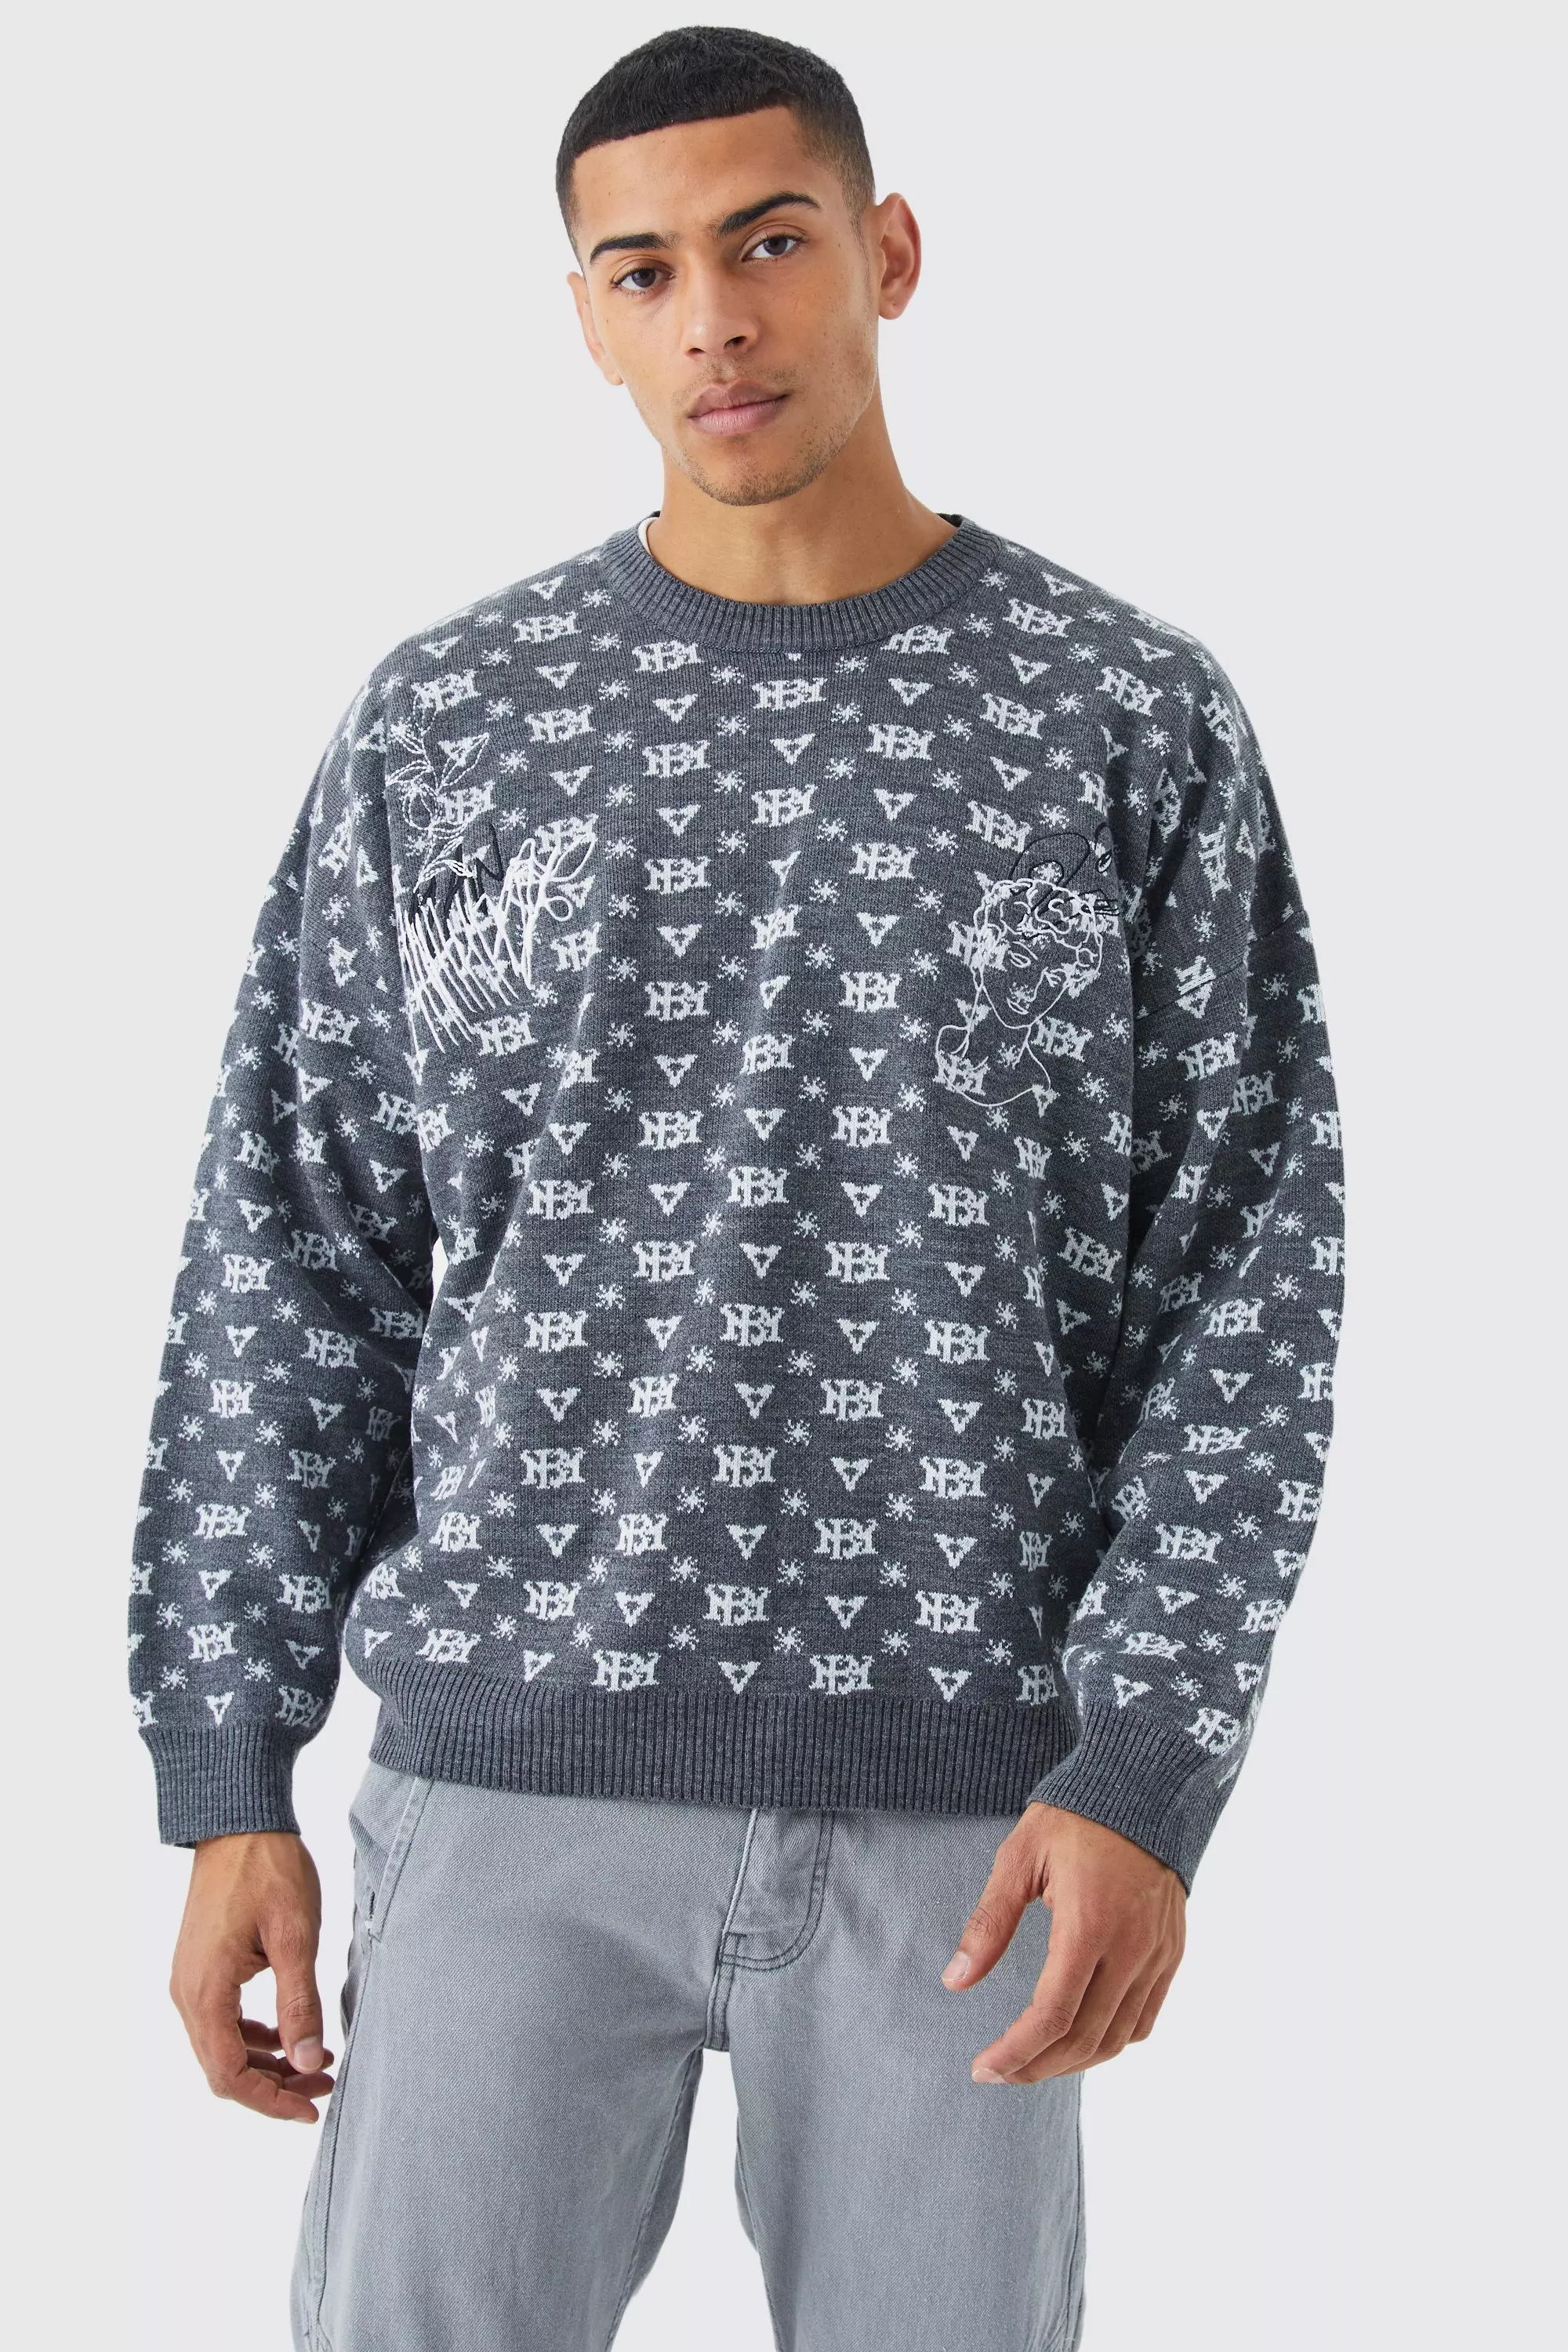 Men's Casual Crewneck Pullover Knitted Sweaters Jumpers Baggy Sweater